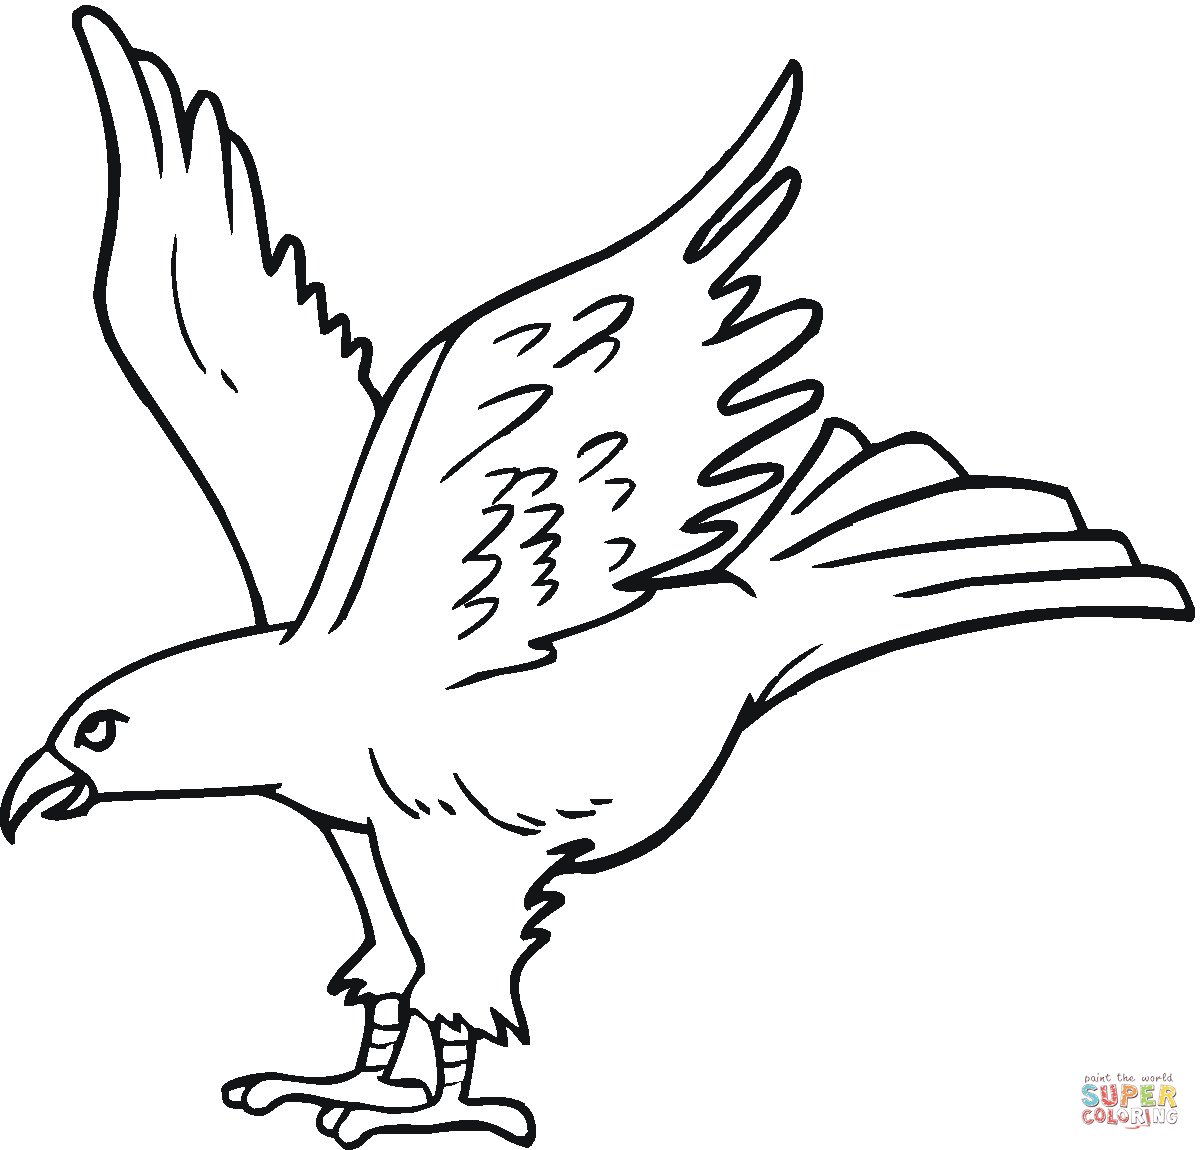 Hawk Coloring Pages
 Hawk 15 coloring page